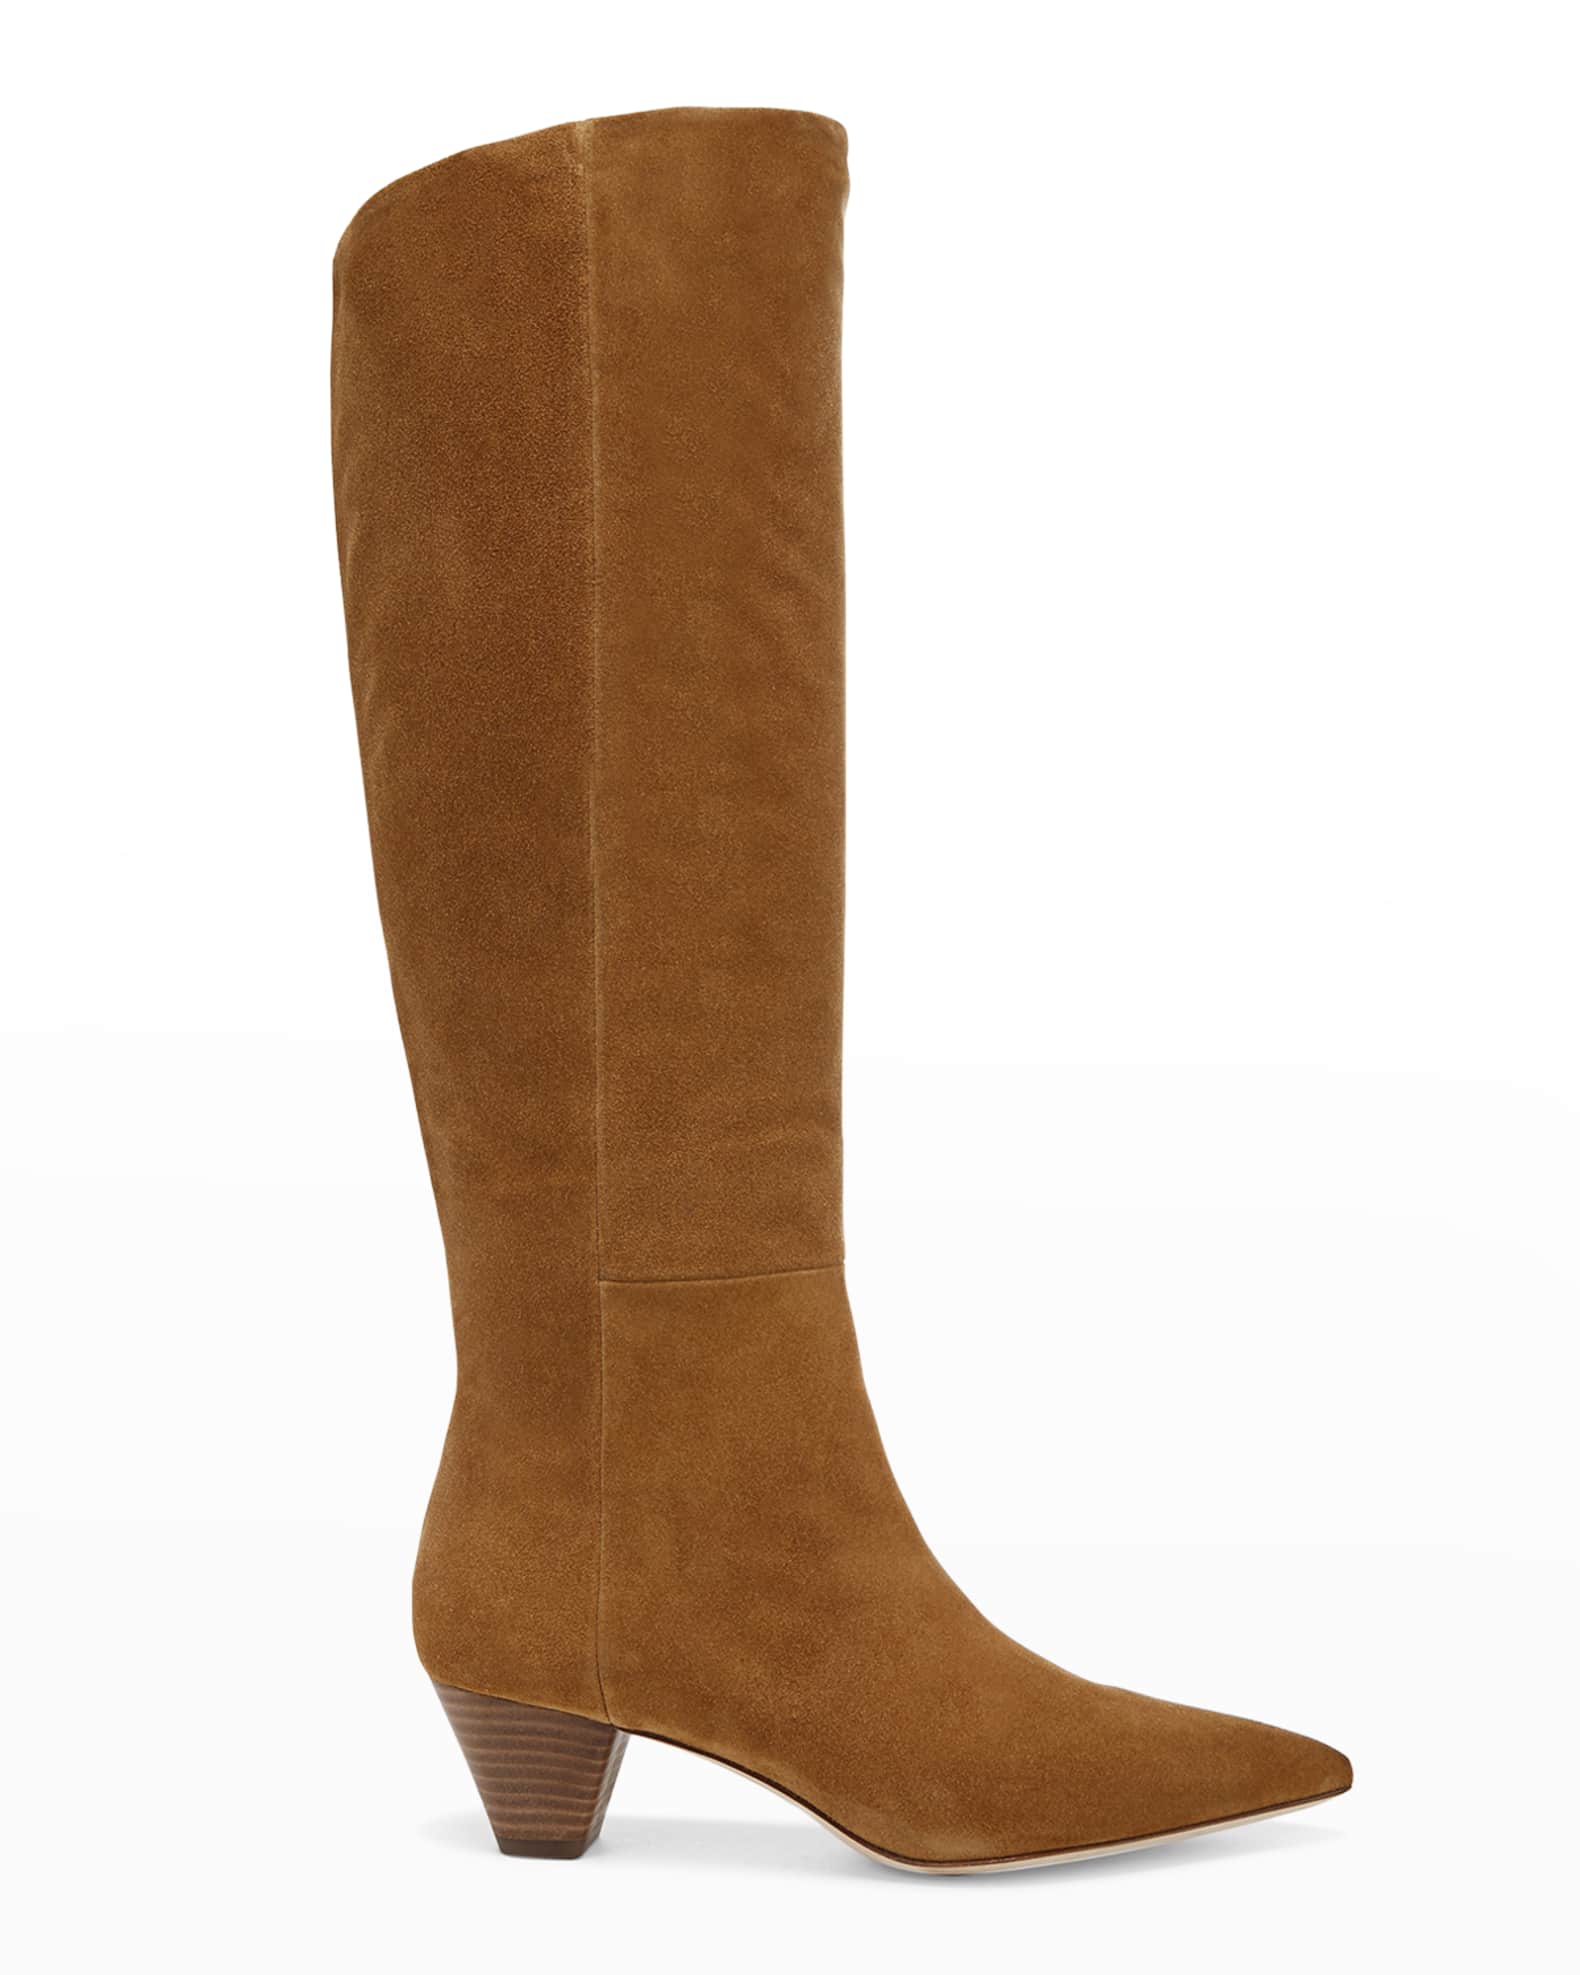 Vince Farida Tall Suede Boots | Neiman Marcus